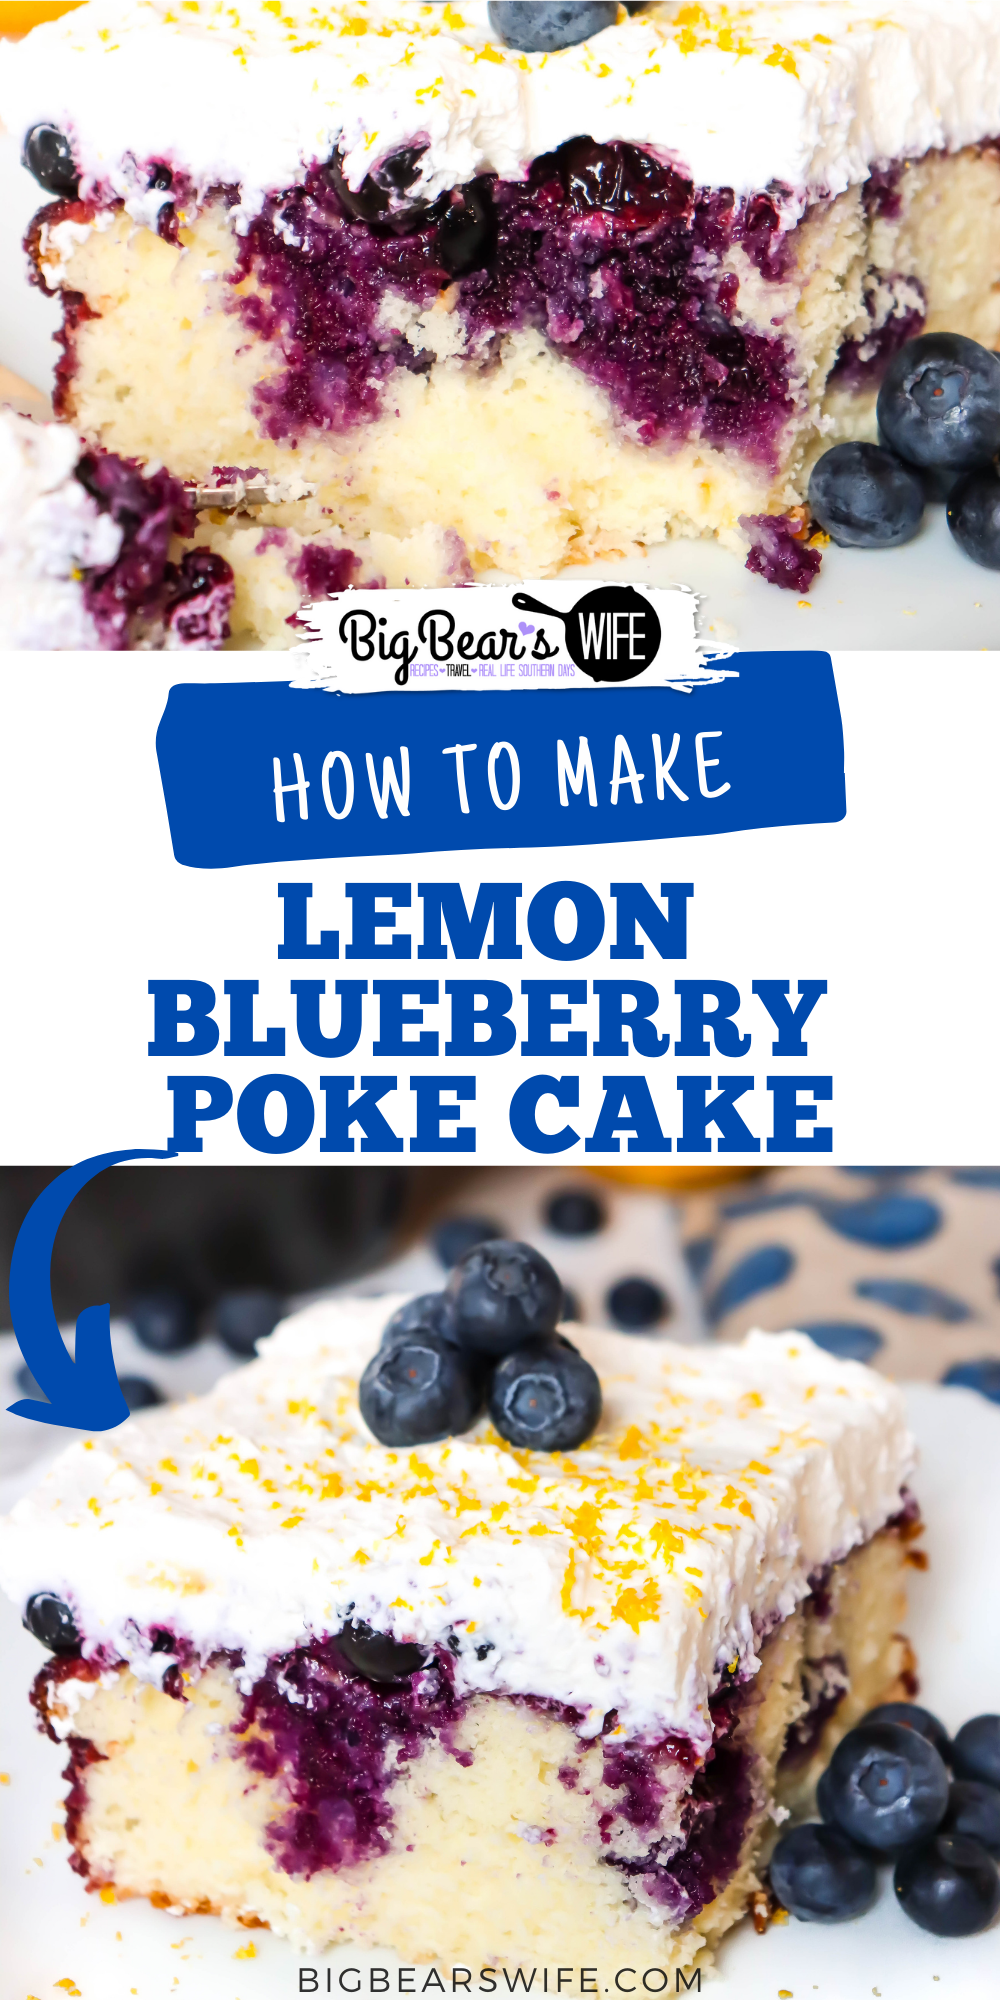 Lemon Blueberry Poke Cake - Welcome spring with this light and fresh lemon poke cake that is topped with a homemade fresh blueberry sauce and lemon crème chantilly!  via @bigbearswife